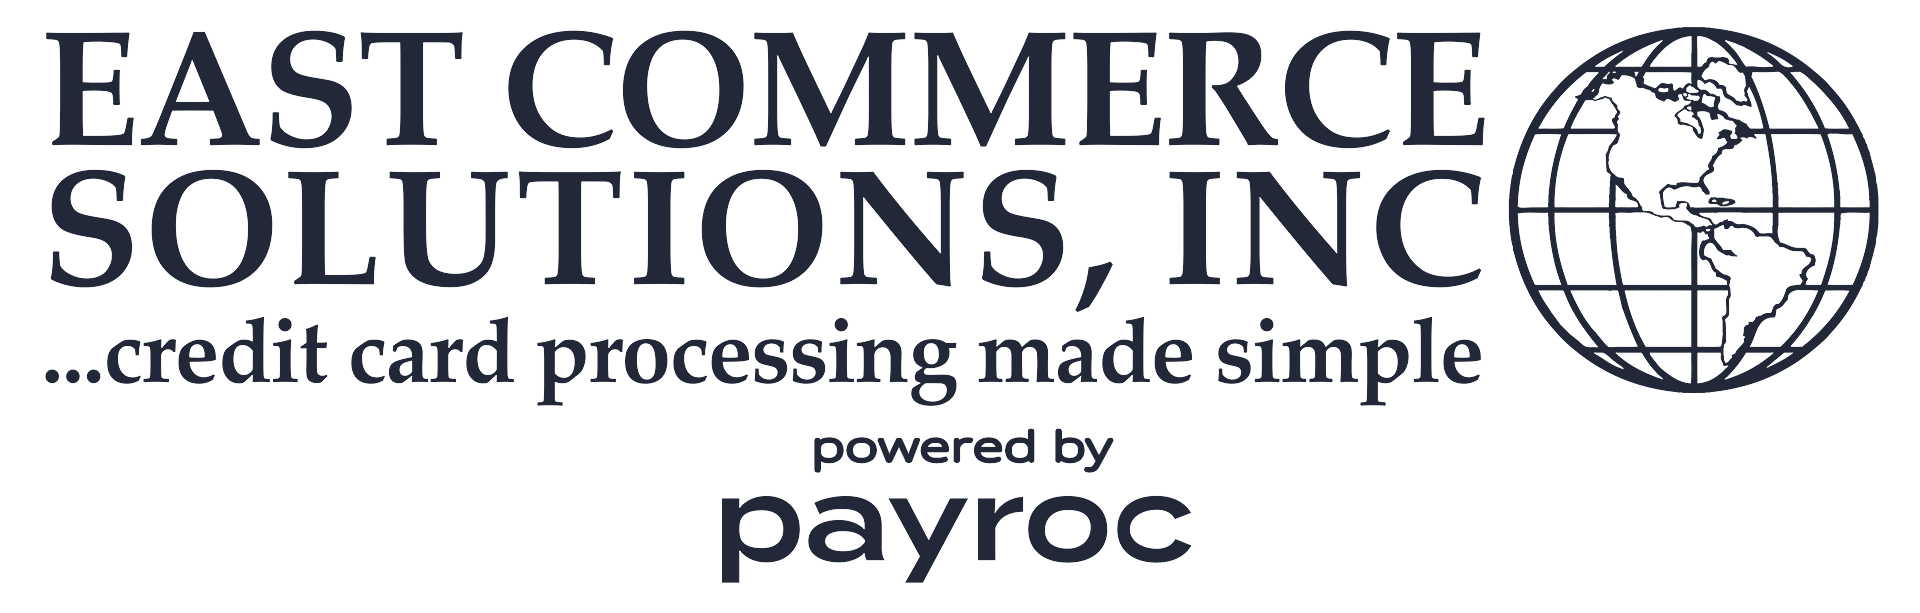 East Commerce Solutions powered by Payroc